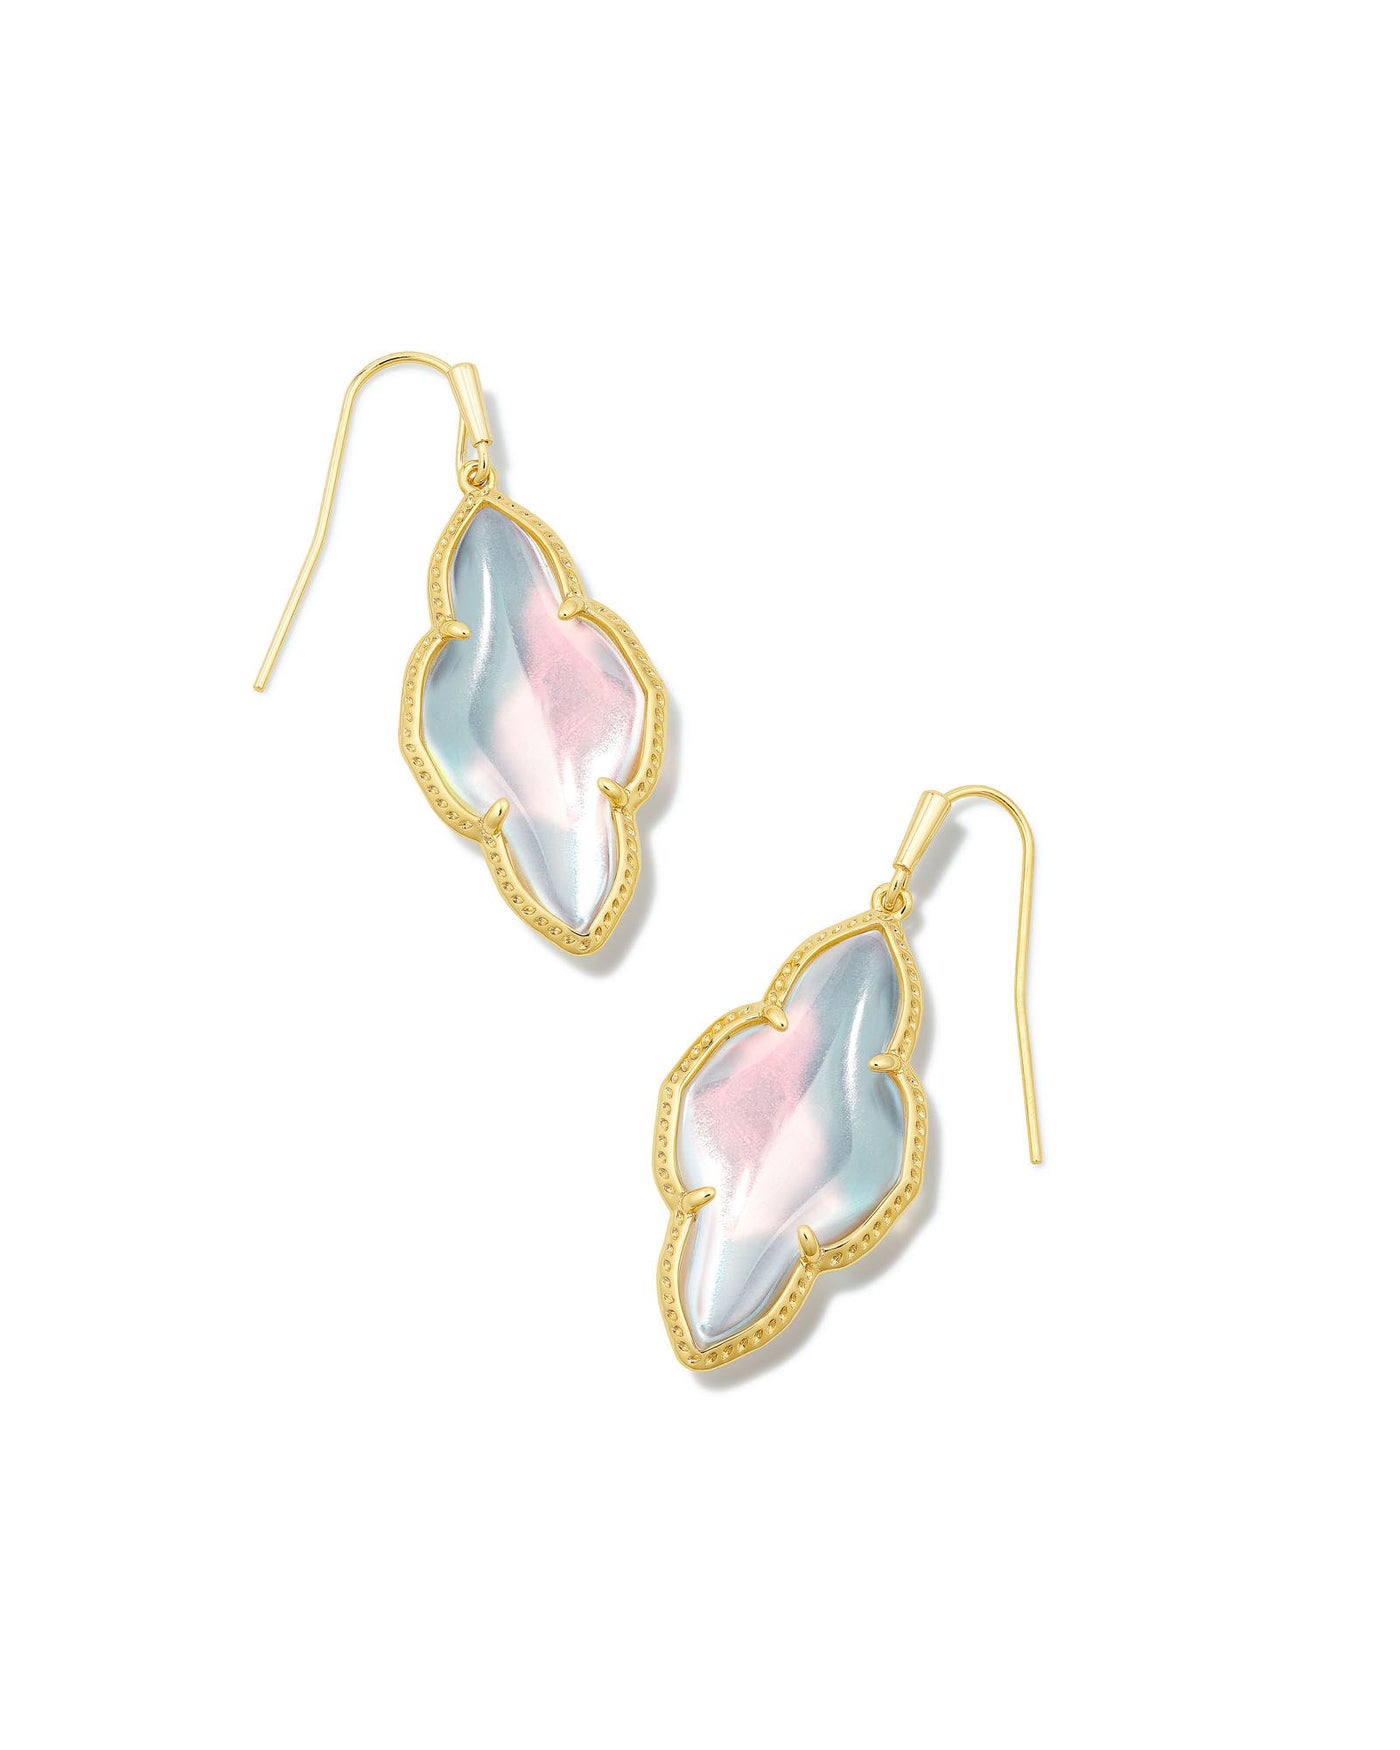 Kendra Scott Abbie Drop Earrings Gold Dichroic Glass-Earrings-Kendra Scott-Market Street Nest, Fashionable Clothing, Shoes and Home Décor Located in Mabank, TX